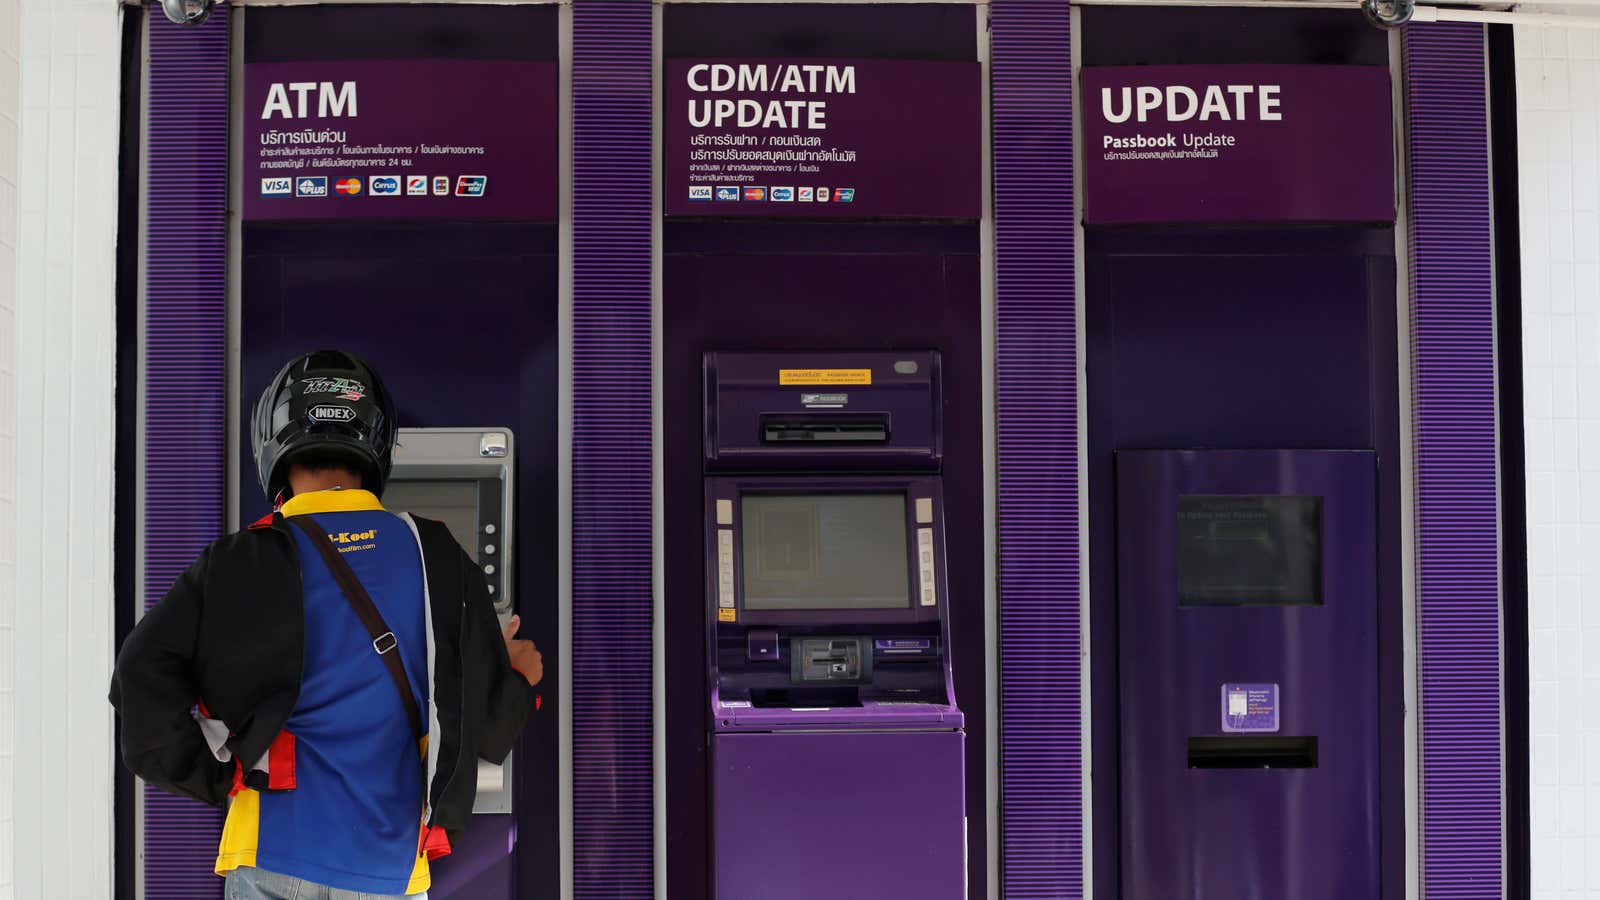 A man uses an ATM machine at the Siam Commercial Bank branch in central Bangkok, Thailand, January 23, 2017. REUTERS/Chaiwat Subprasom – RTSWXOX